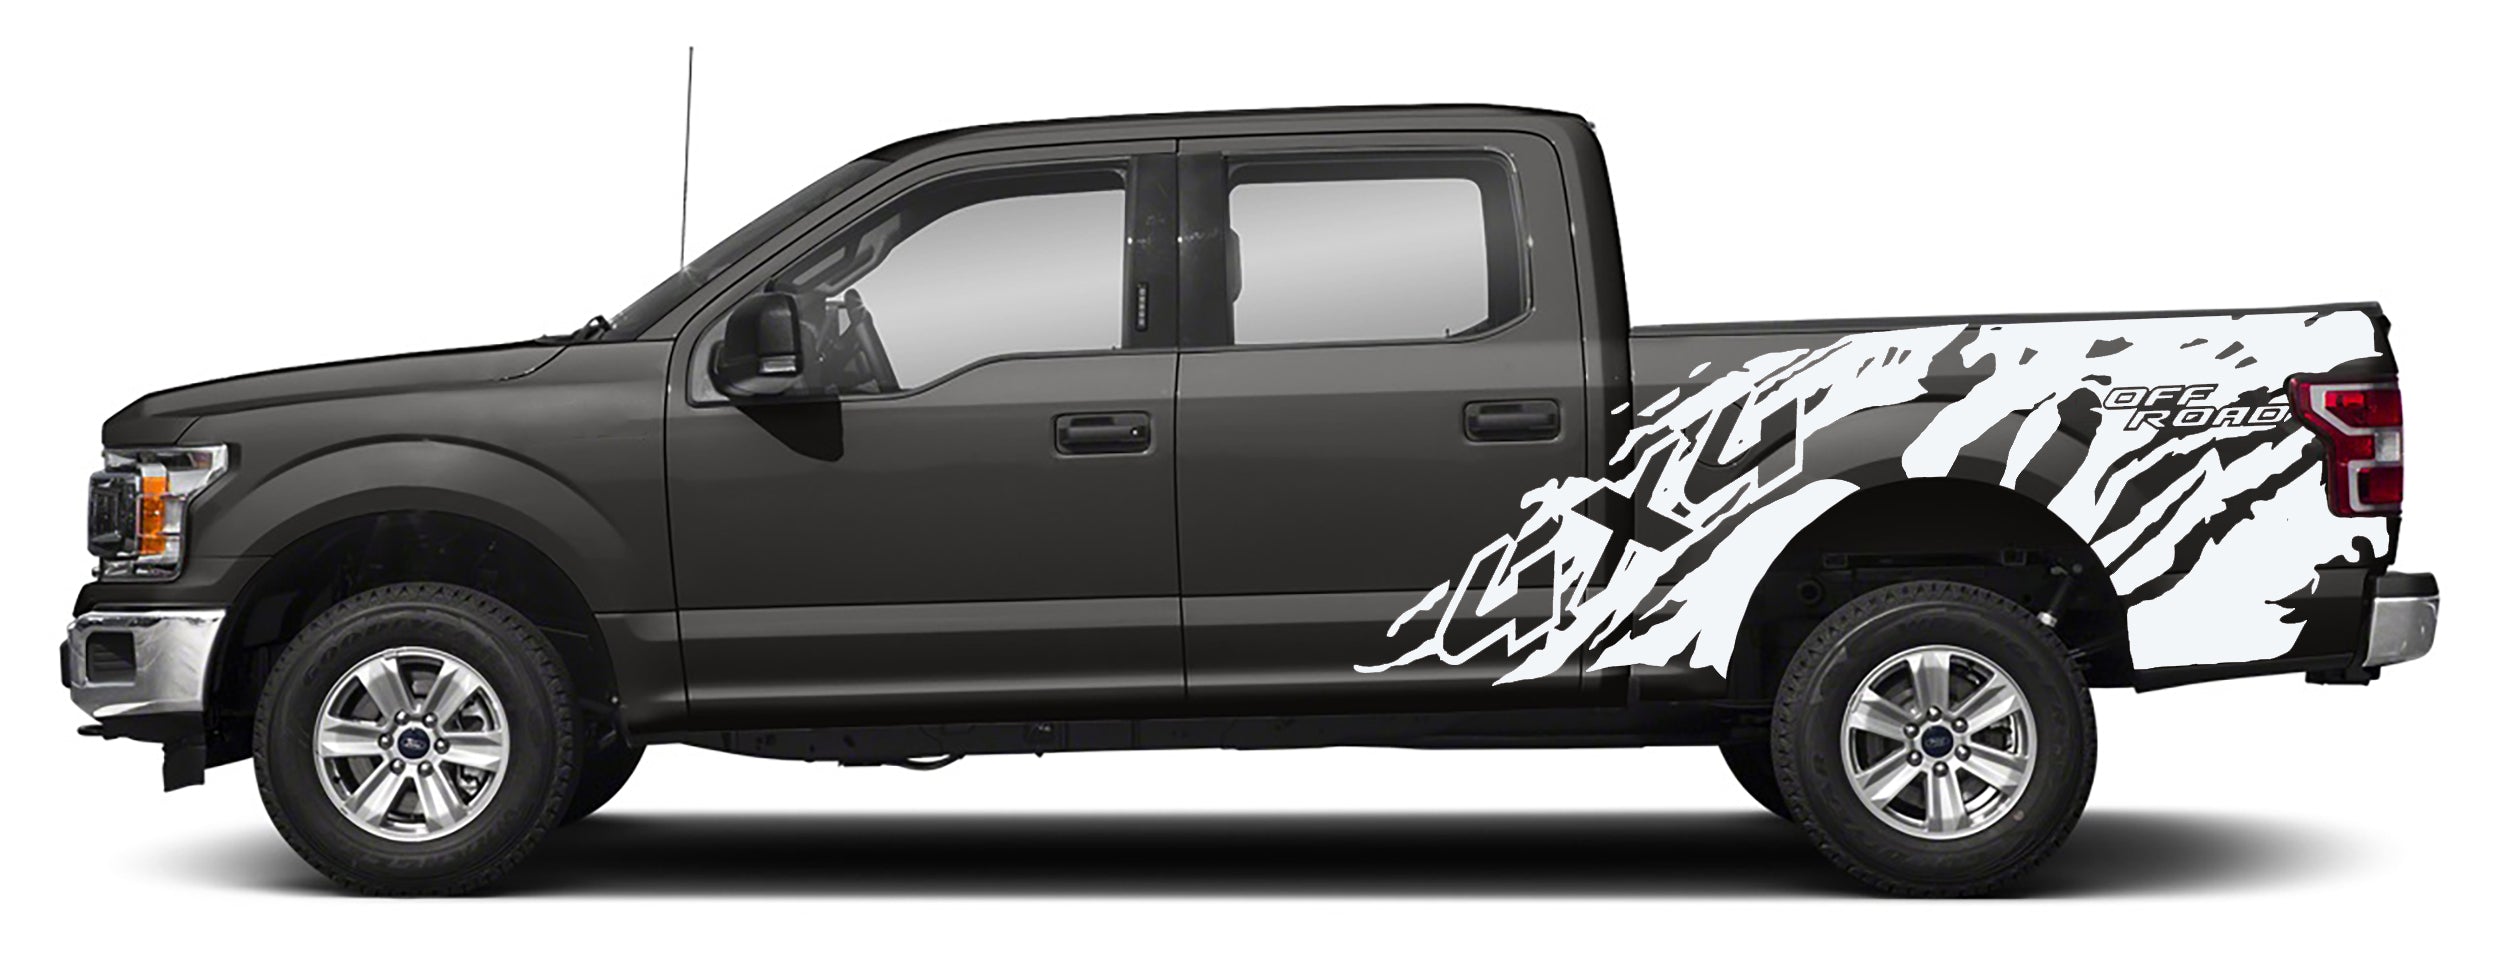 Ford F-150 4x4 Off Road Bed Decals (Pair) : Vinyl Graphics Kit Fits (2015-2020)